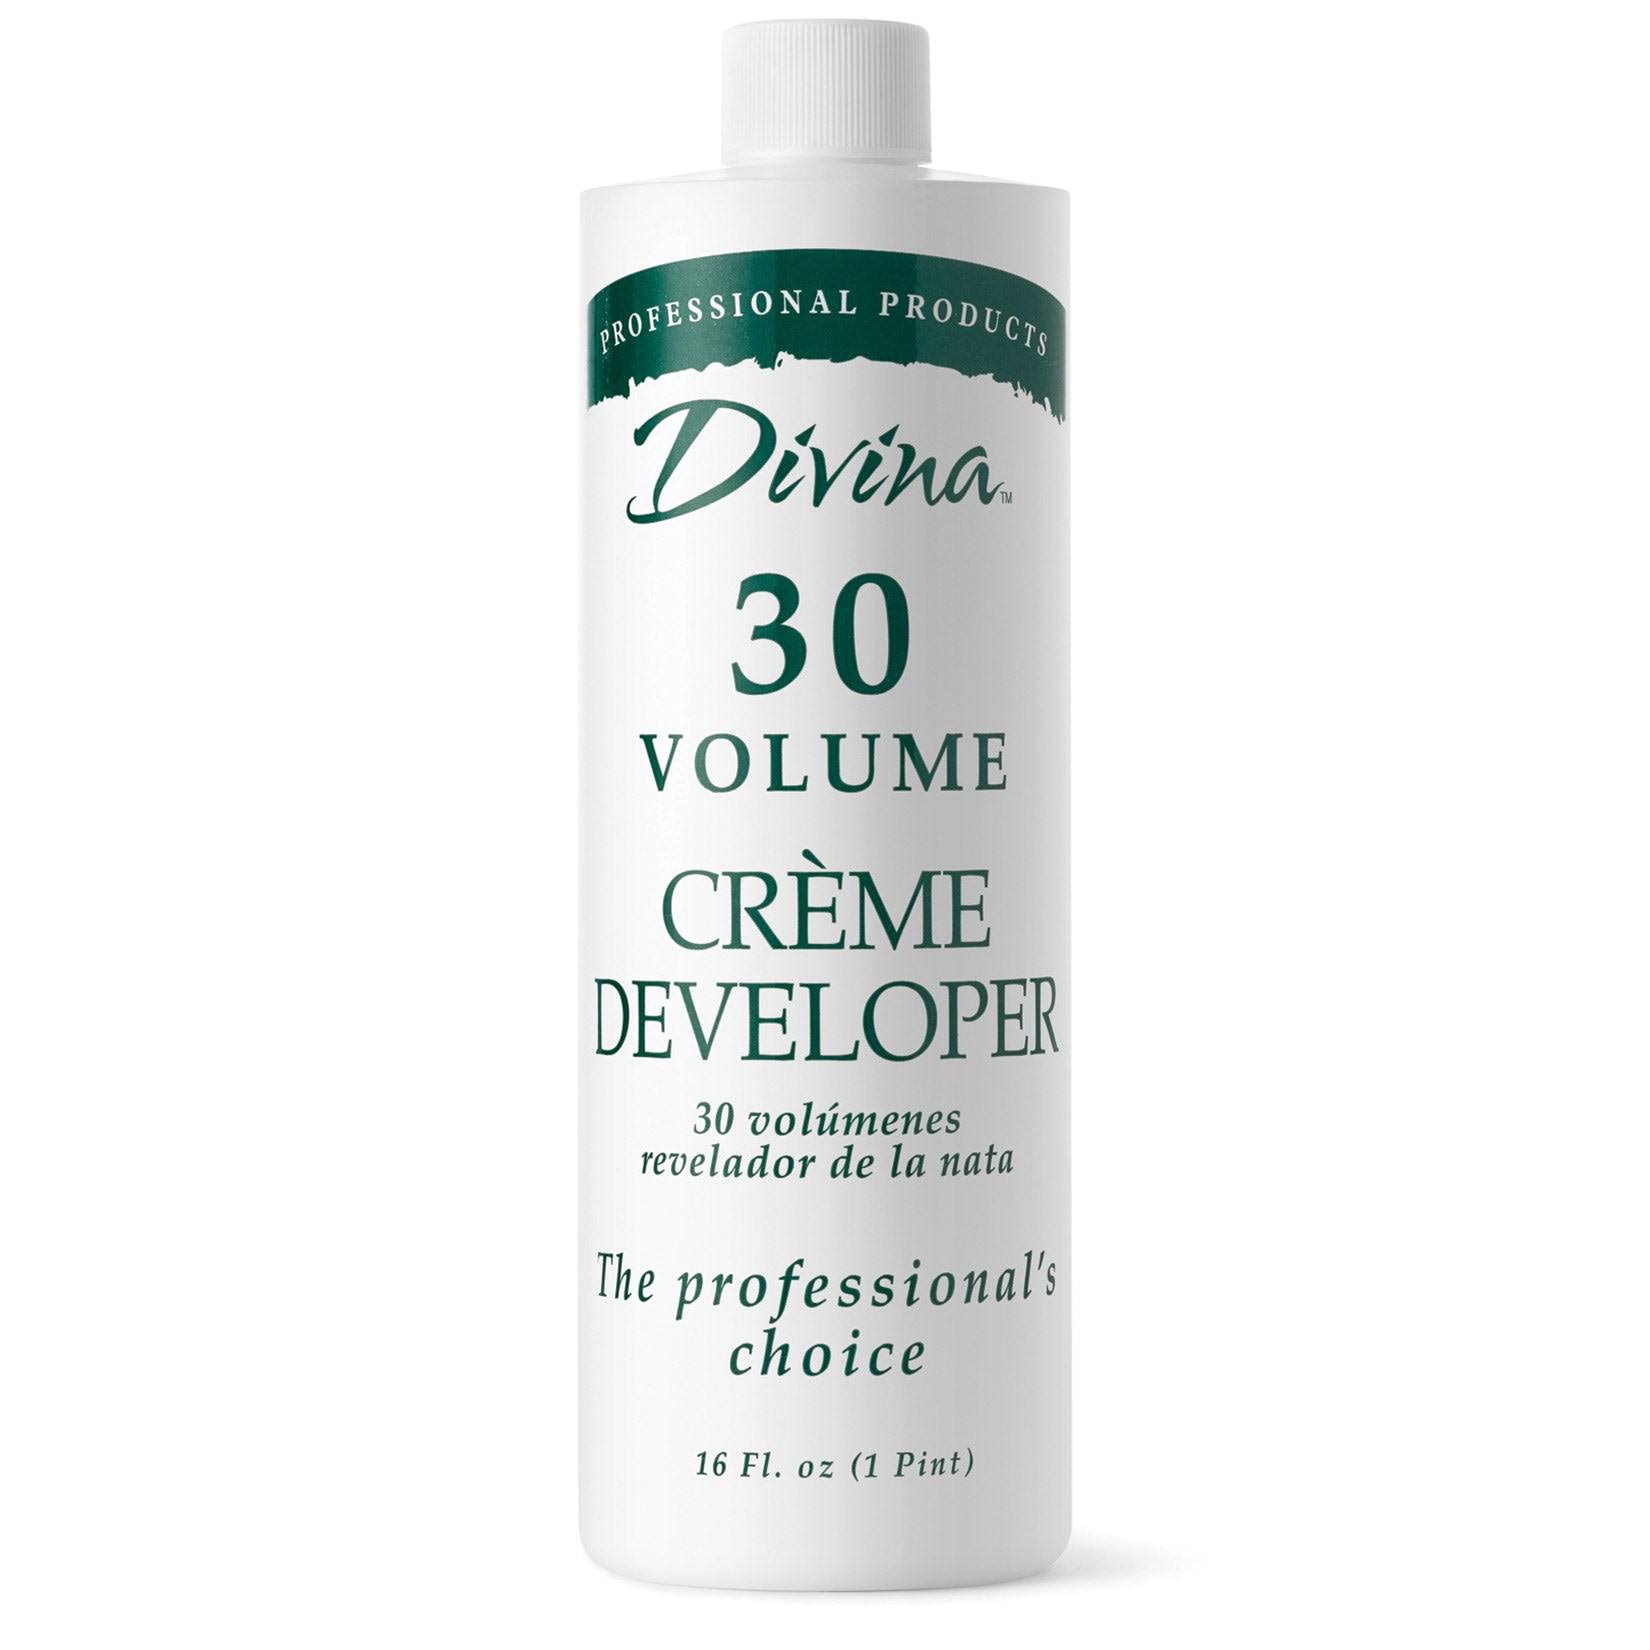 Divina 30 Volume Creme Developer 470ml | Haircare | Best Price Guarantee | Free Shipping On All Orders | Delivery guaranteed